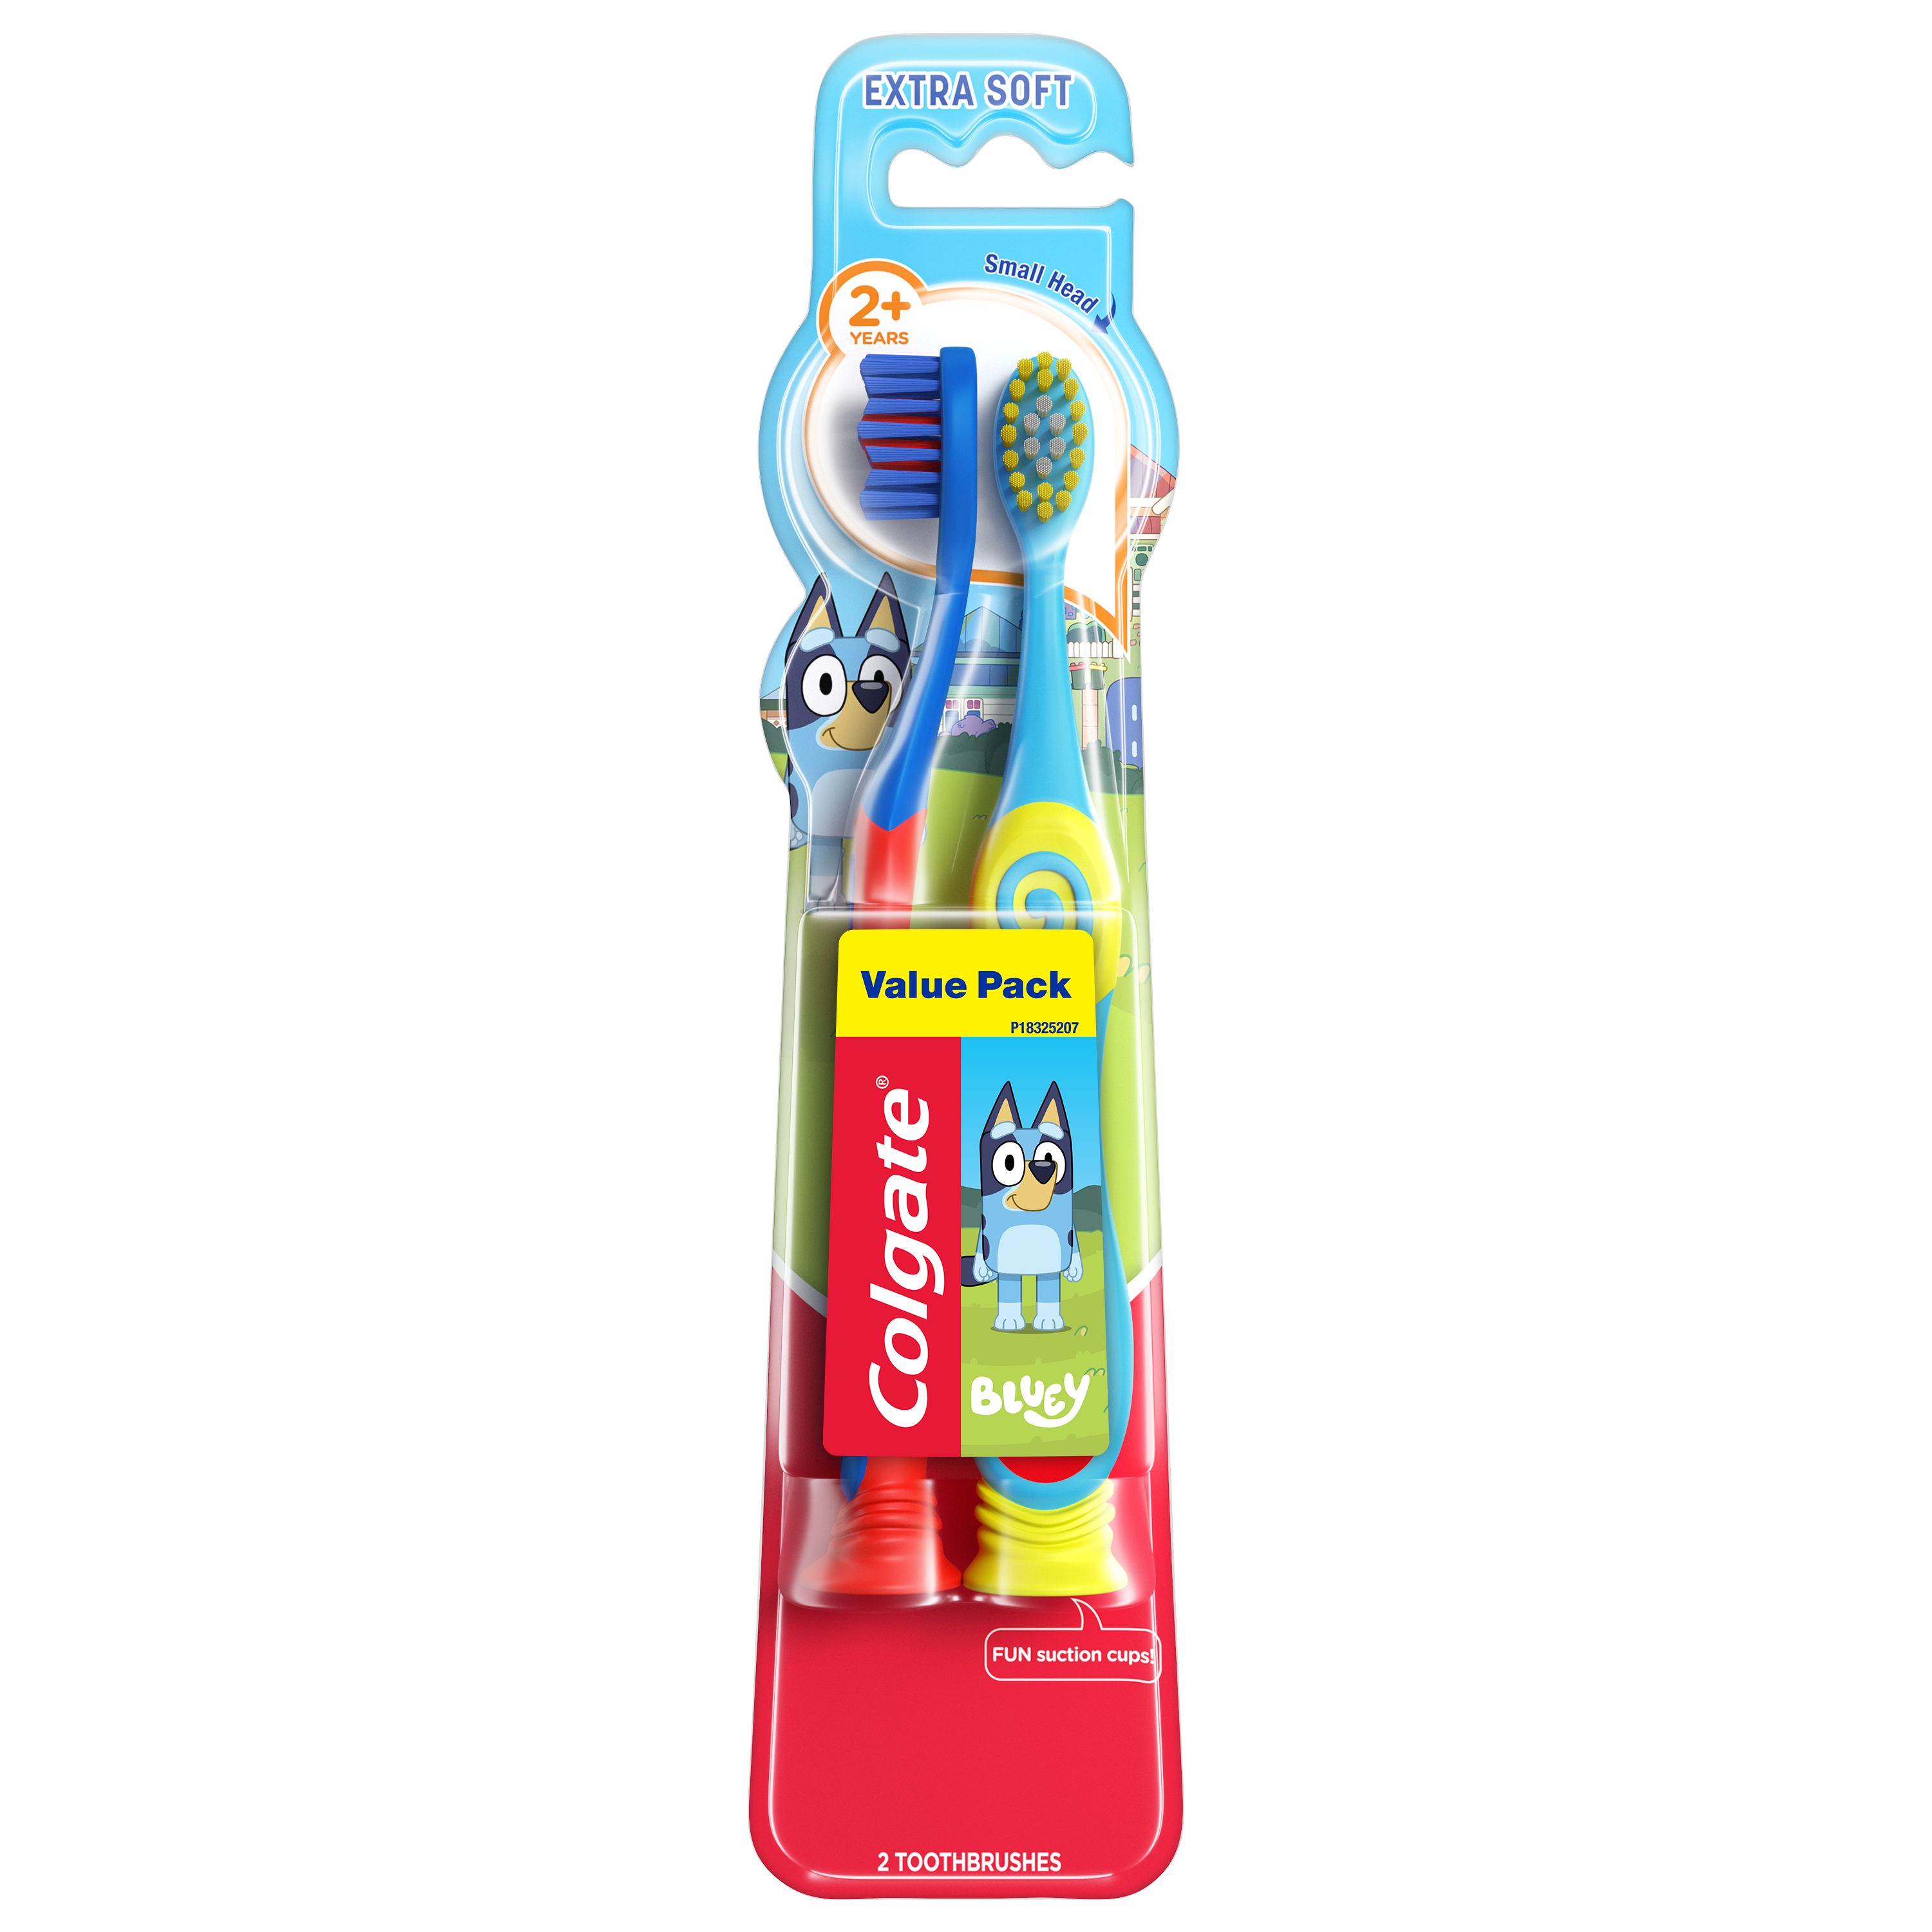 Colgate Kids Toothbrush with Extra Soft Bristles and Suction Cup, Kids Toothbrush Pack, Bluey, 2 pk